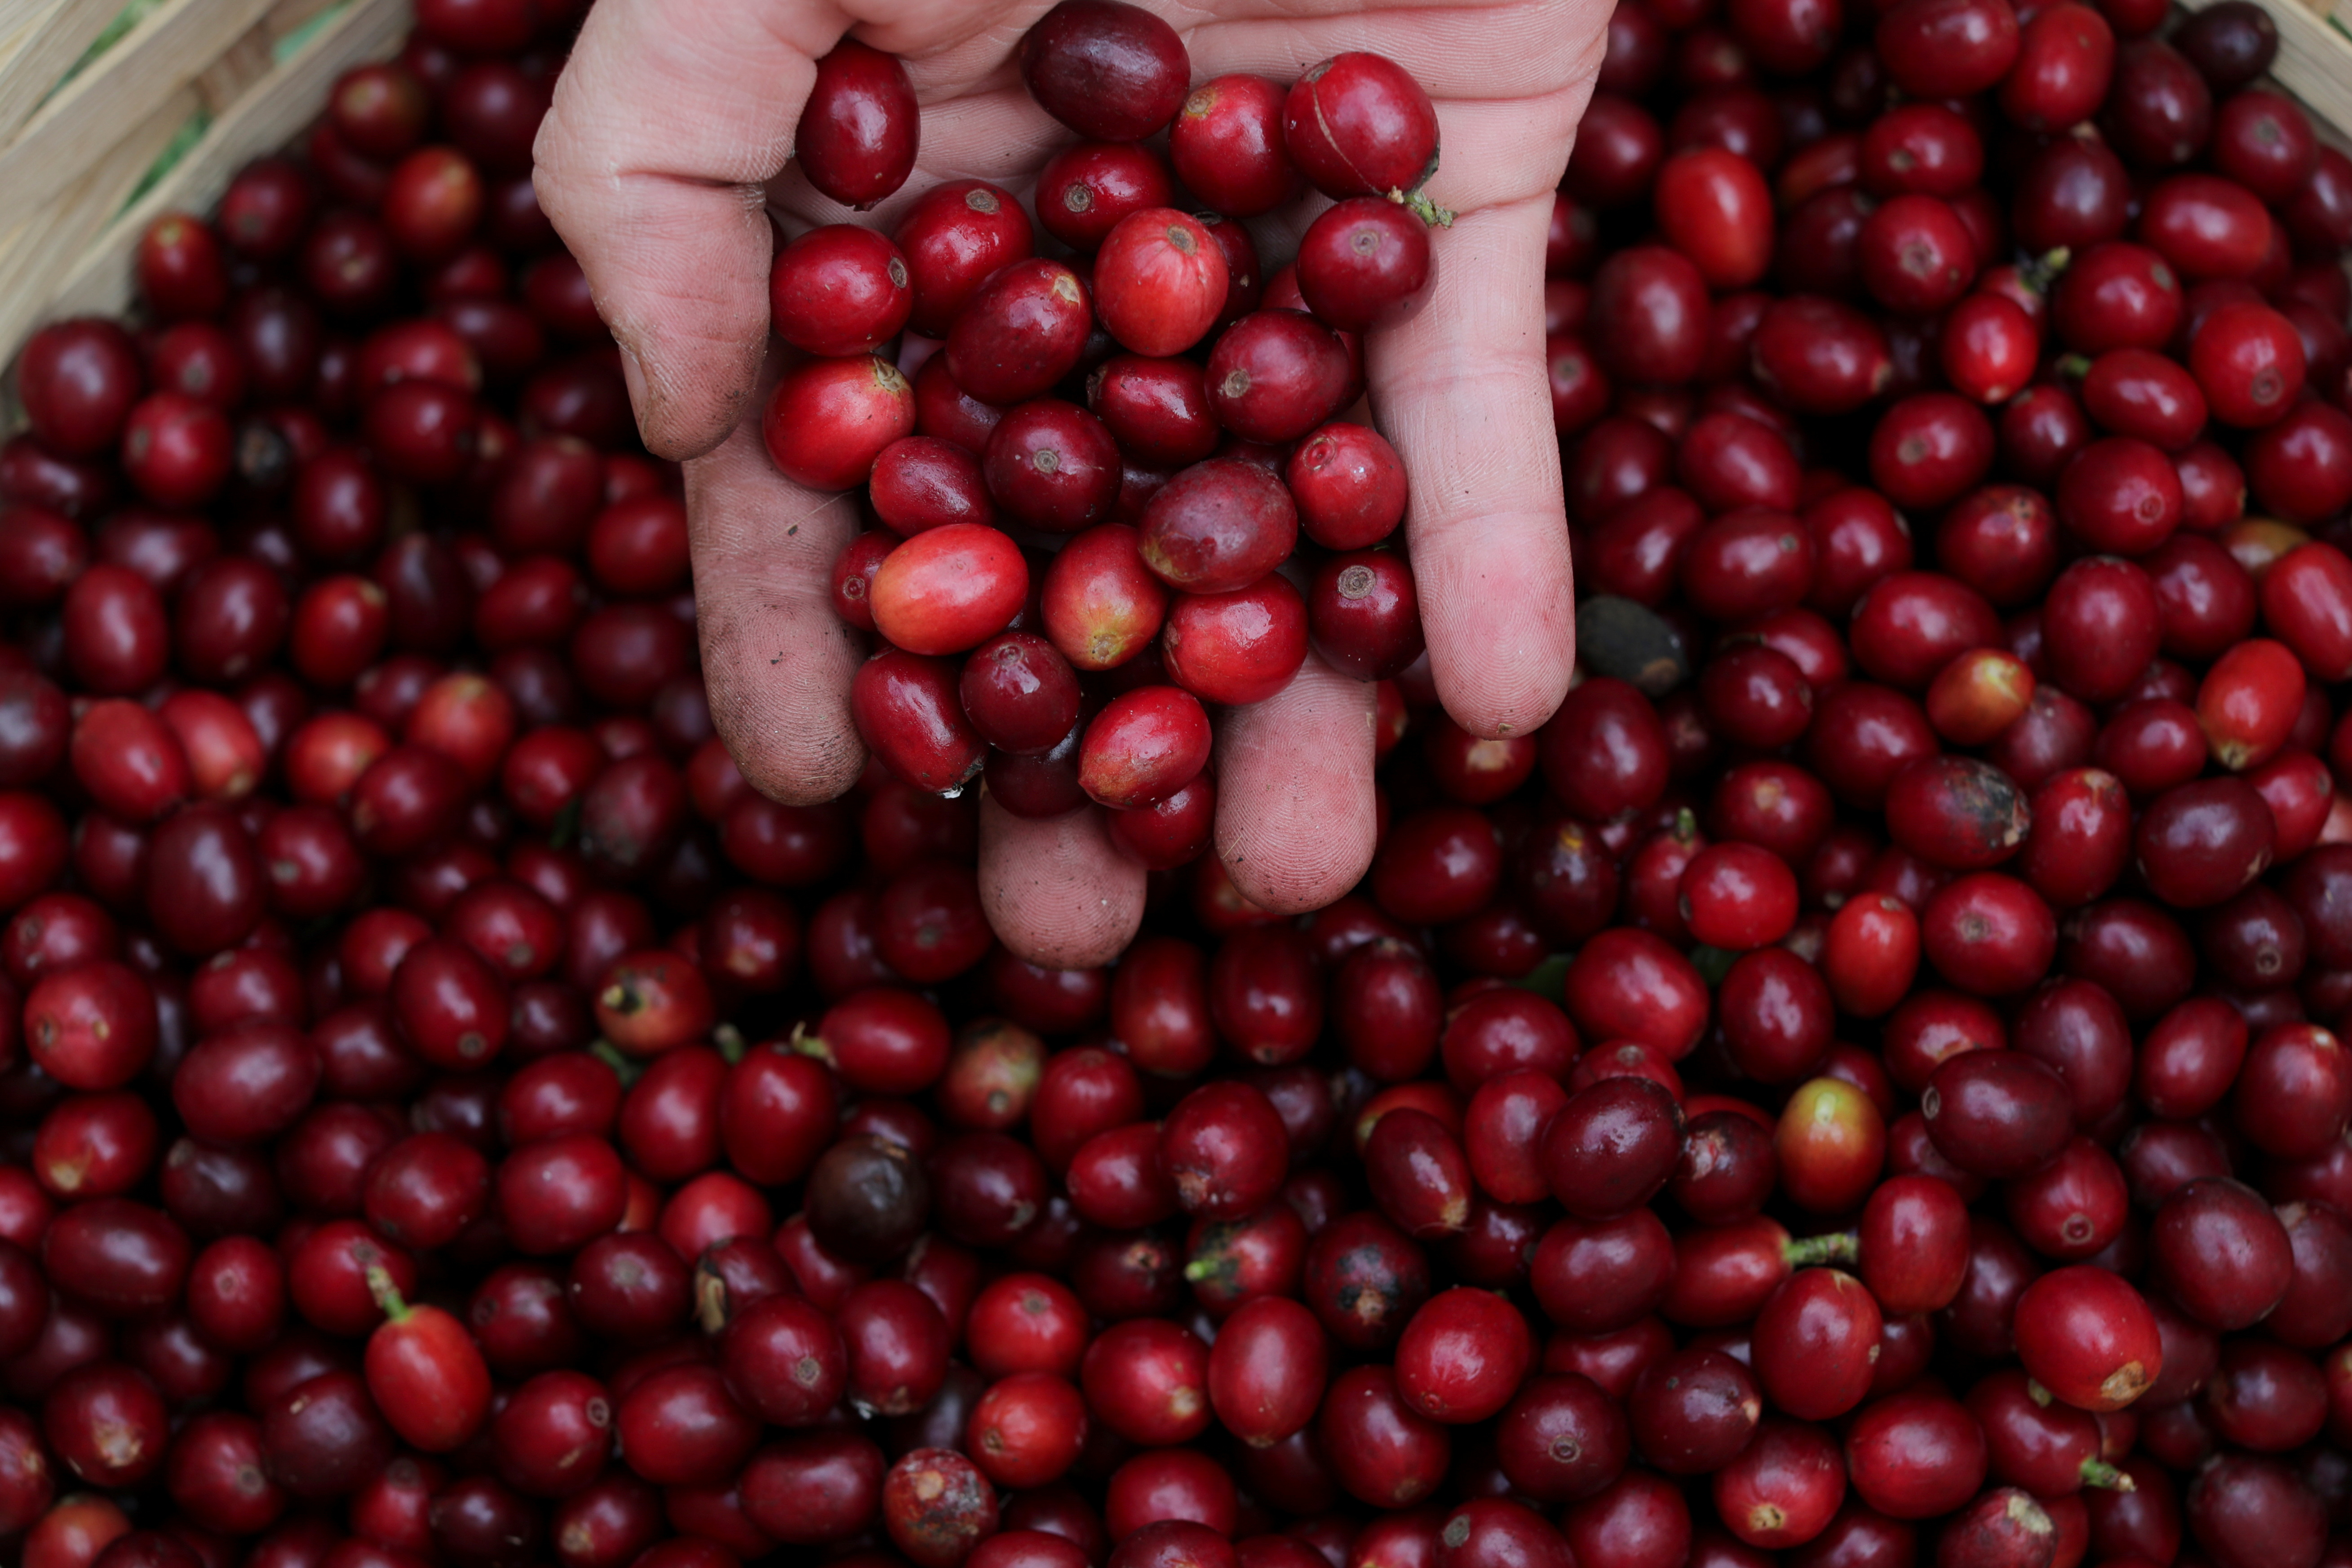 Sao Paulo's Biological Institute hosts one of the largest urban coffee plantations in the world